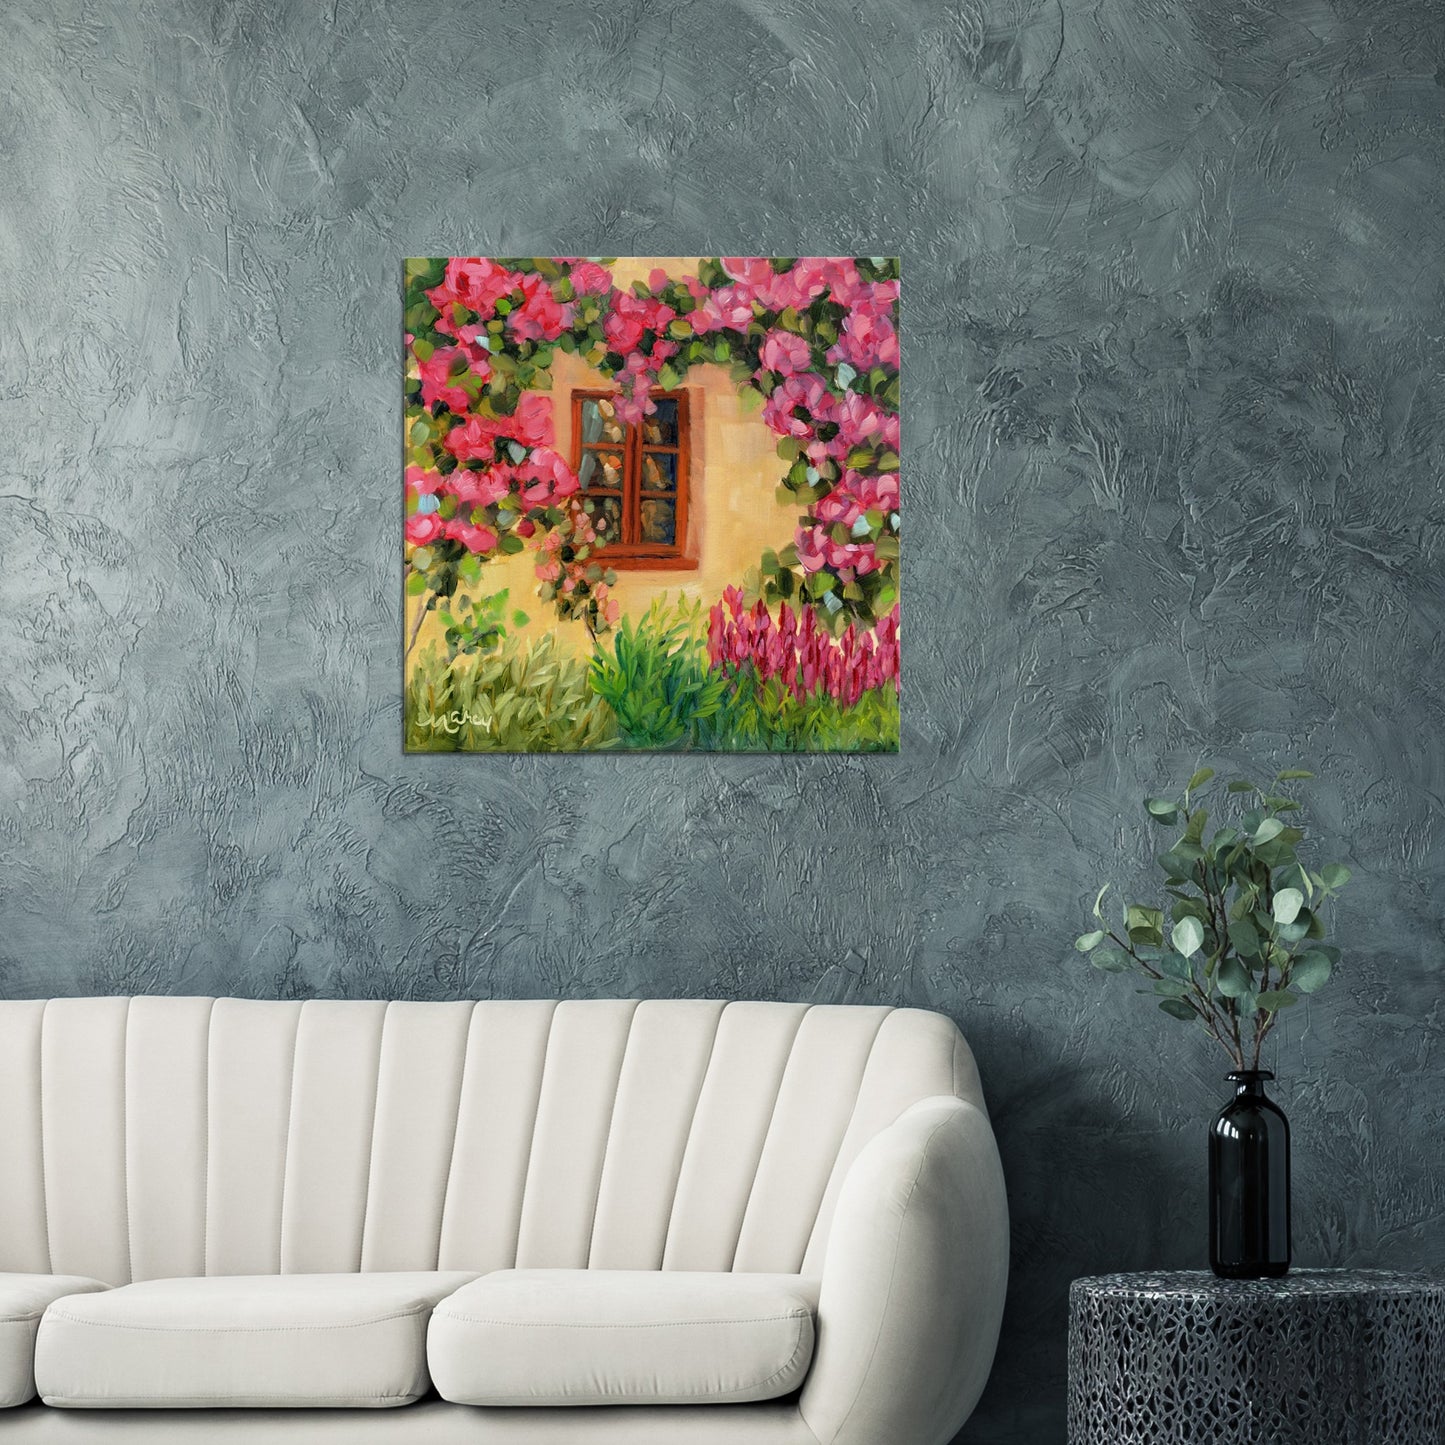 Roses at My Tuscan Villa Window Original Oil & Stretched Canvas Prints